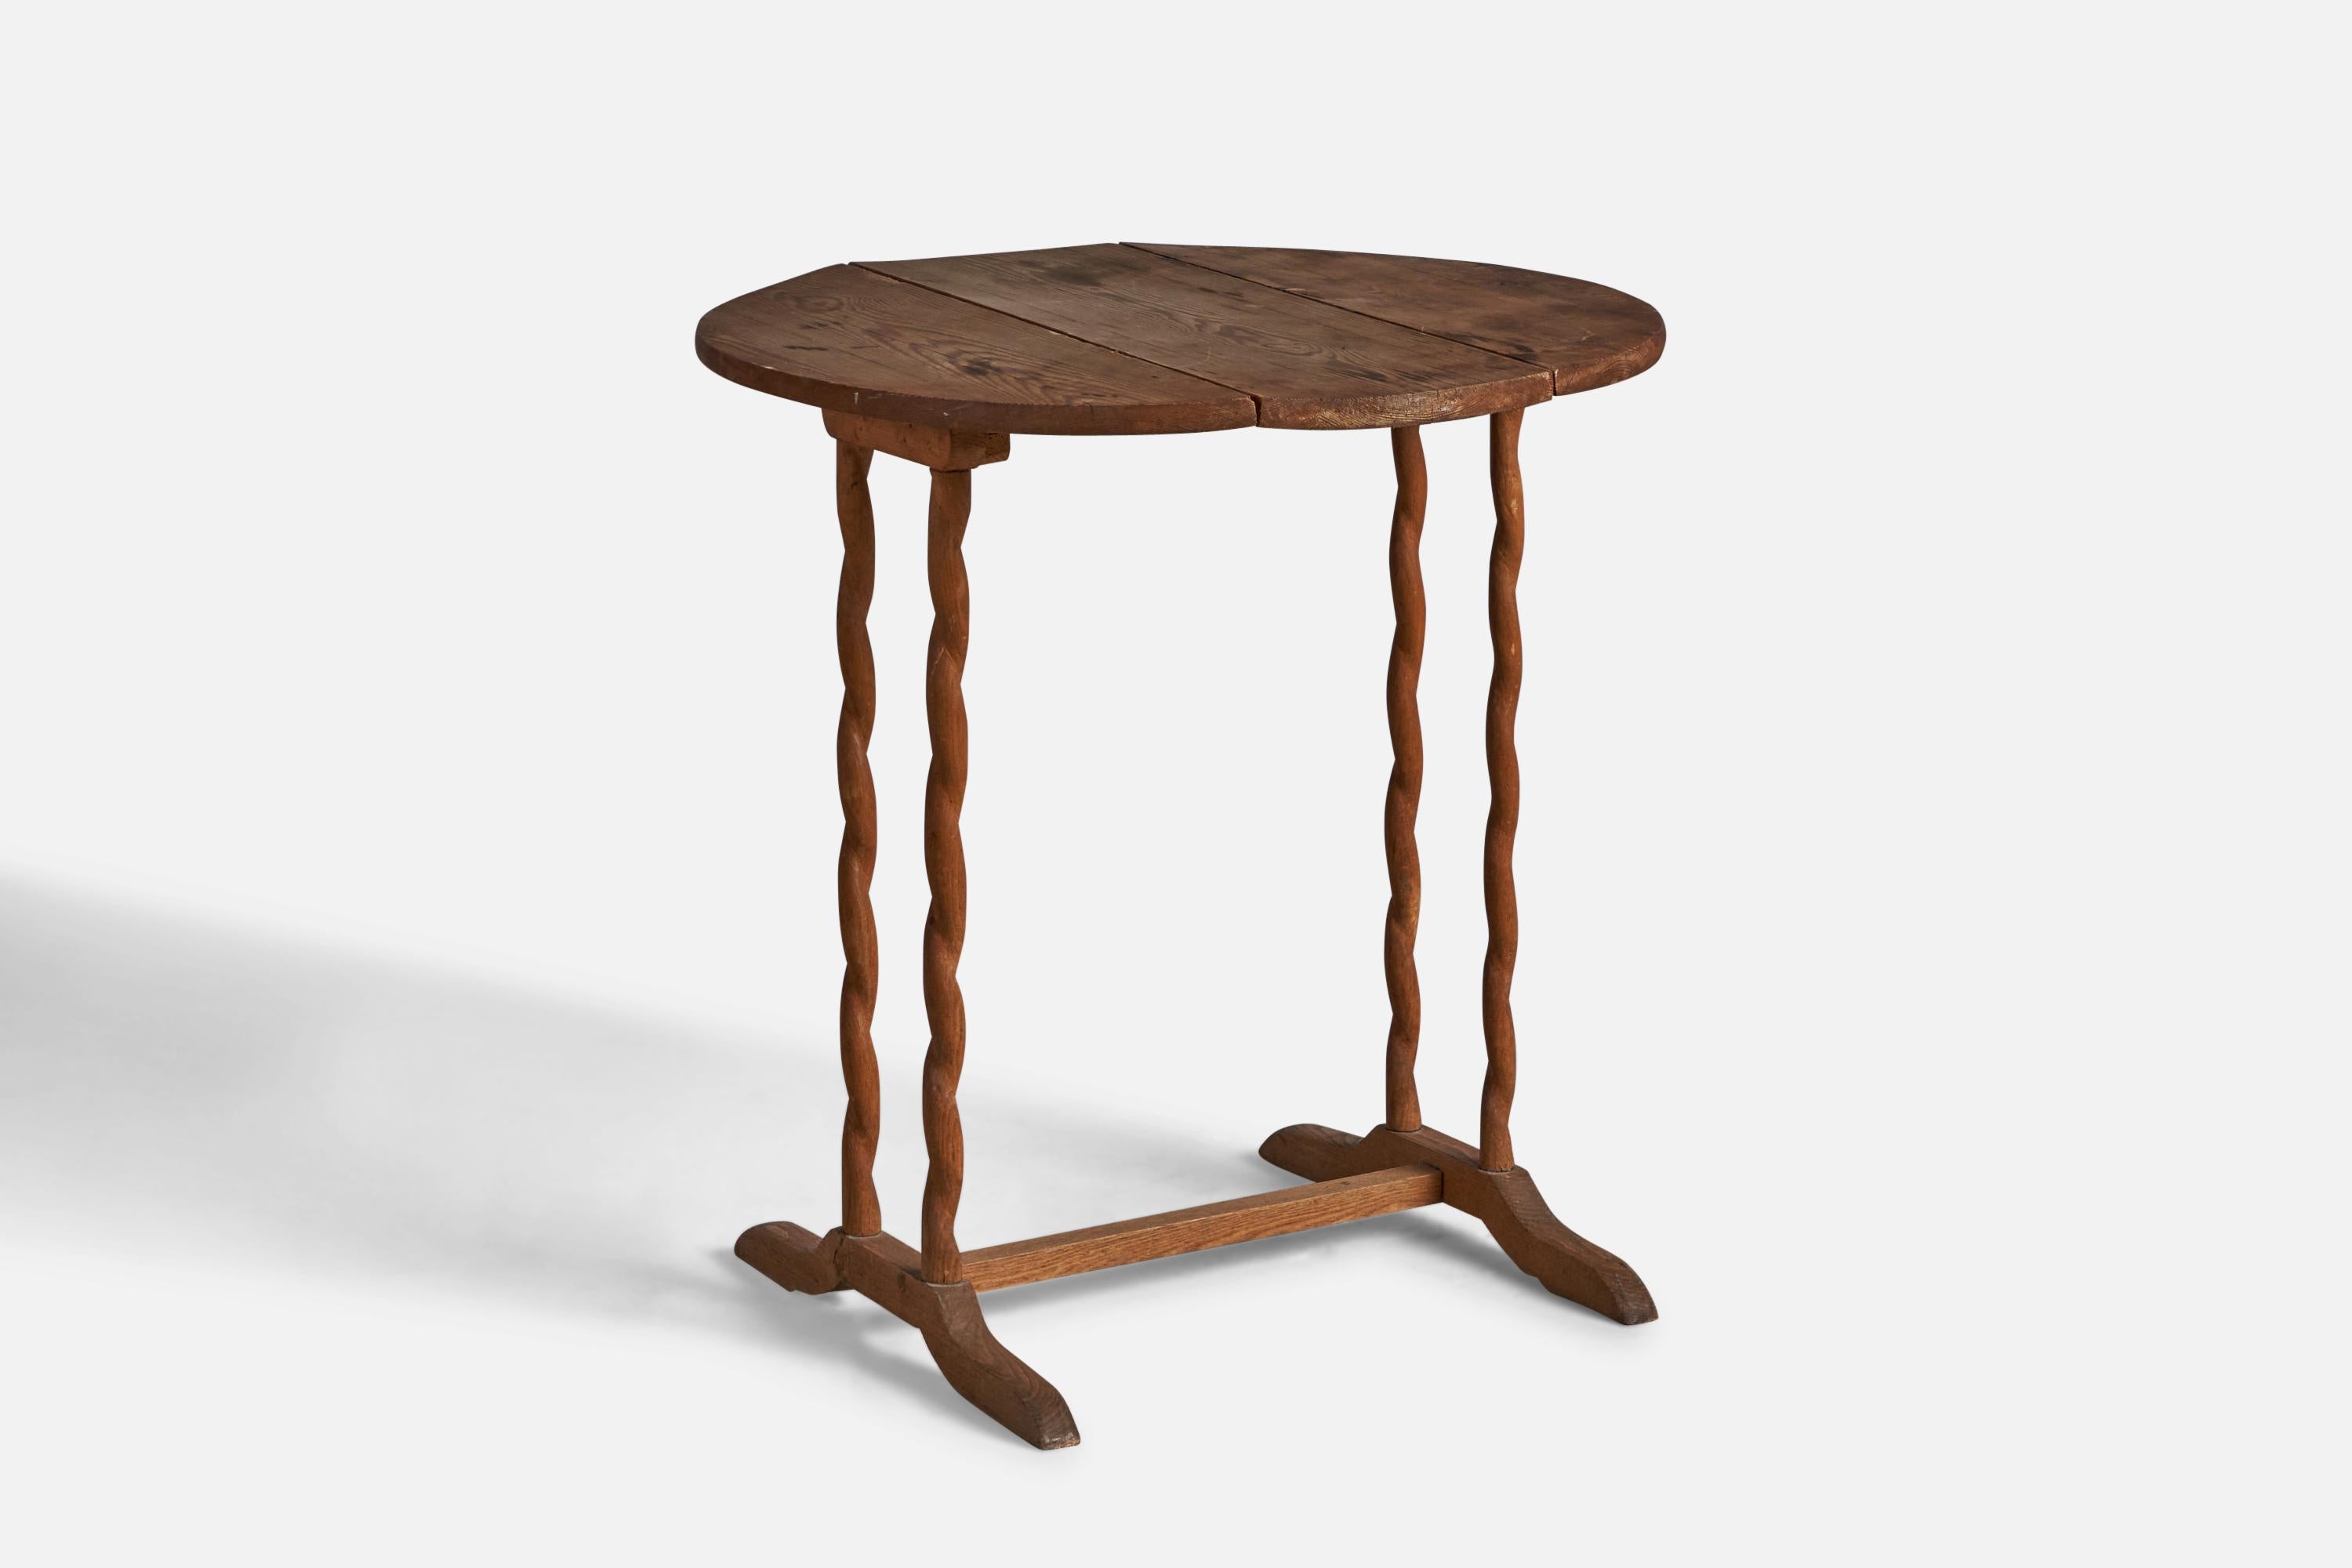 An adjustable pine end table, designed and produced in Sweden, c. 1900.